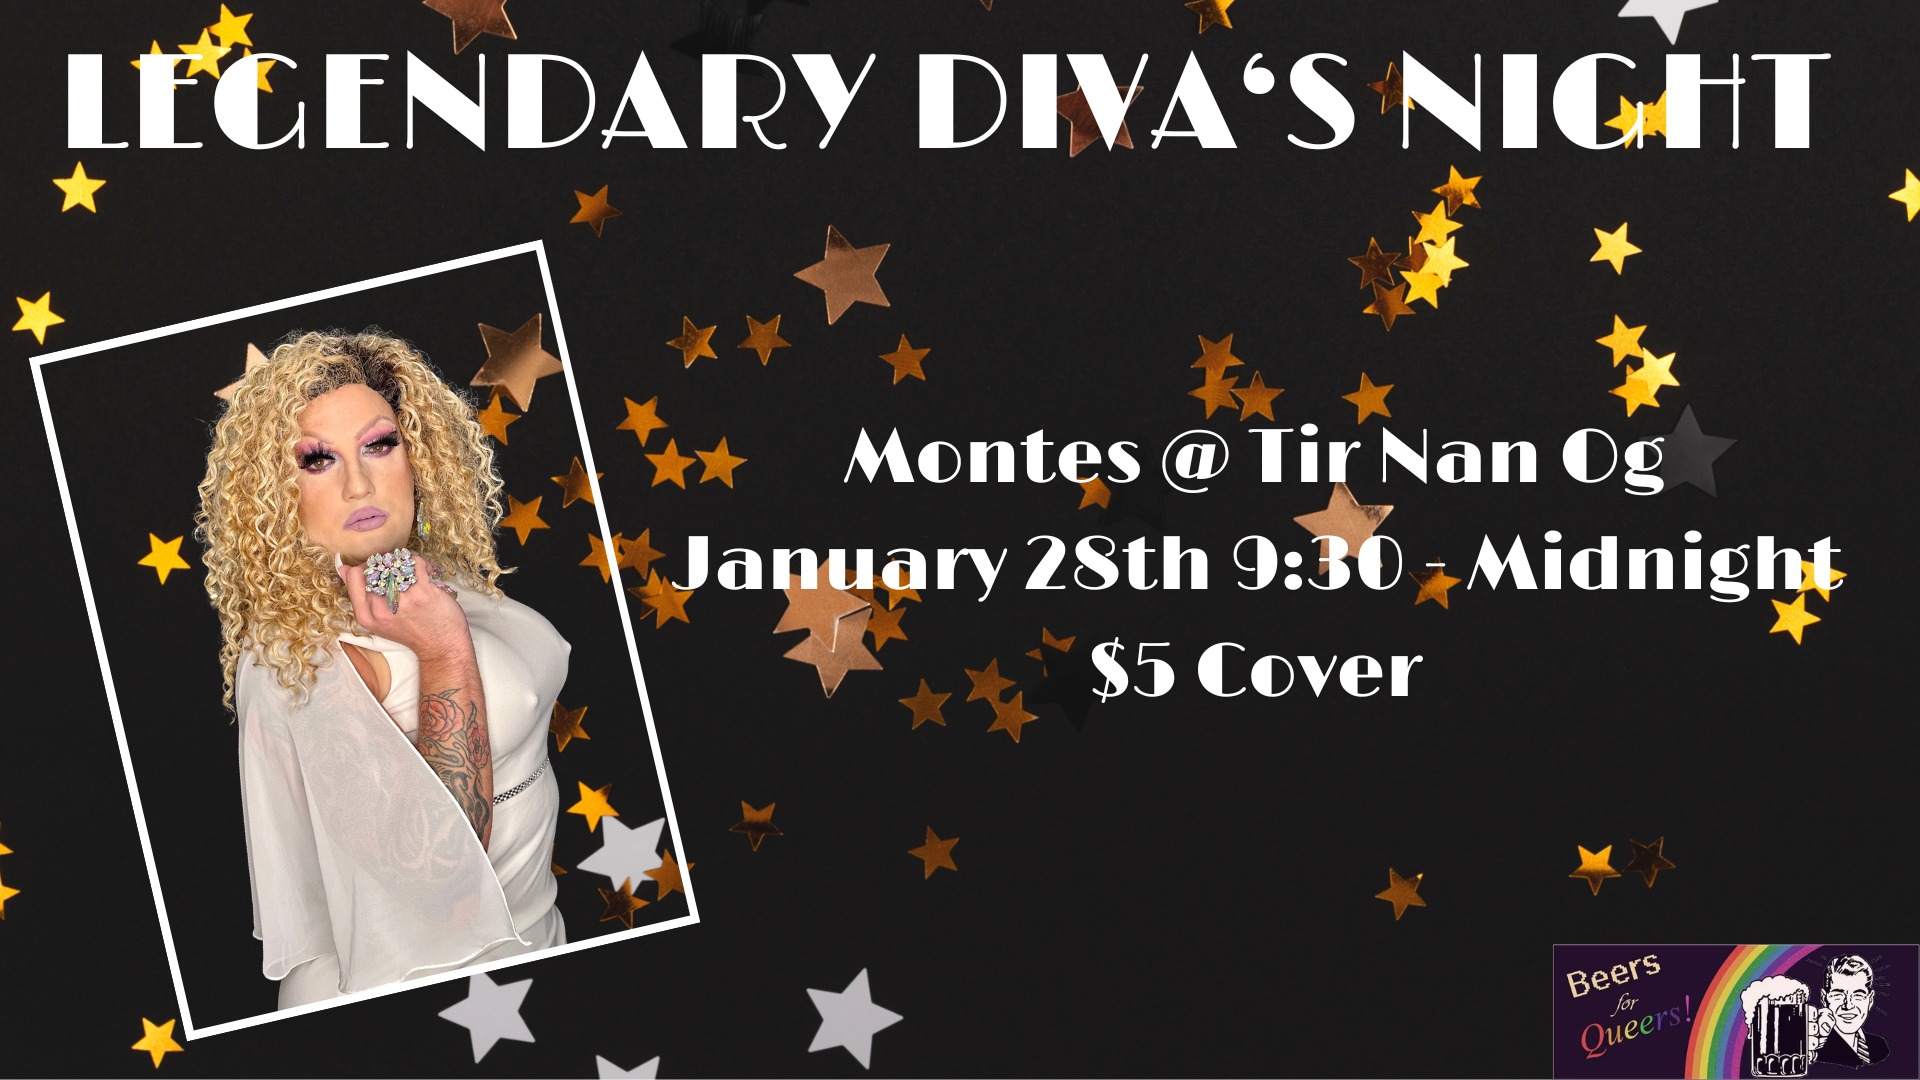 A photograph of Peechez against a starry background. Text reads: "Legendary Diva’s Night Montes @ Tir Nan Og January 28th 9:30 - midnight $5 cover"